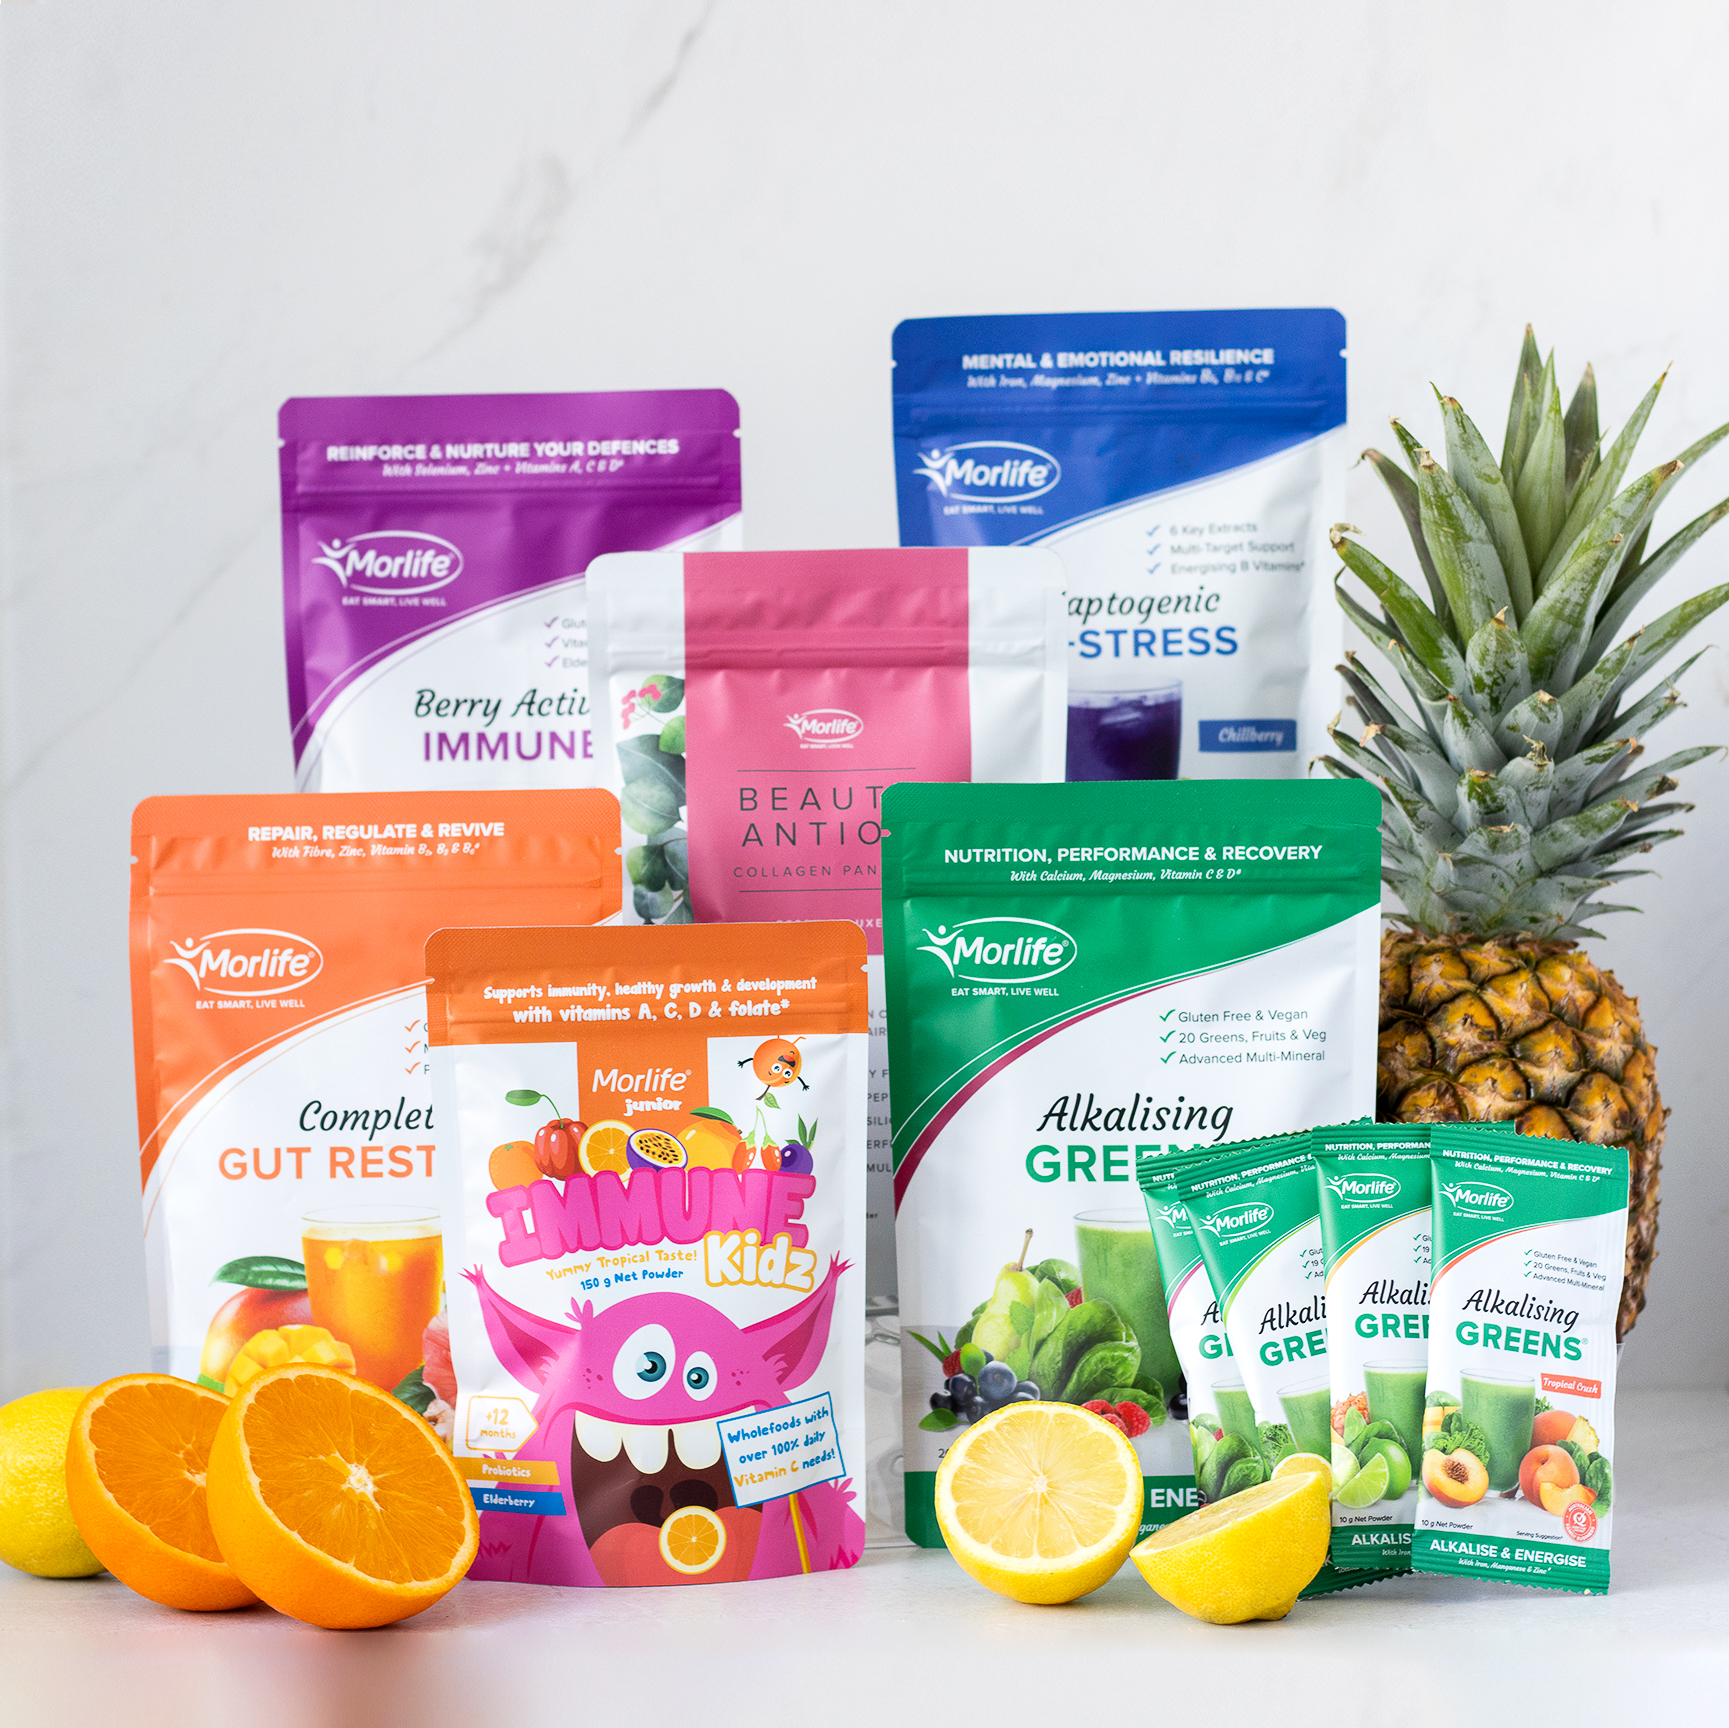 Win the Ultimate Morlife Wellbeing Prize Pack